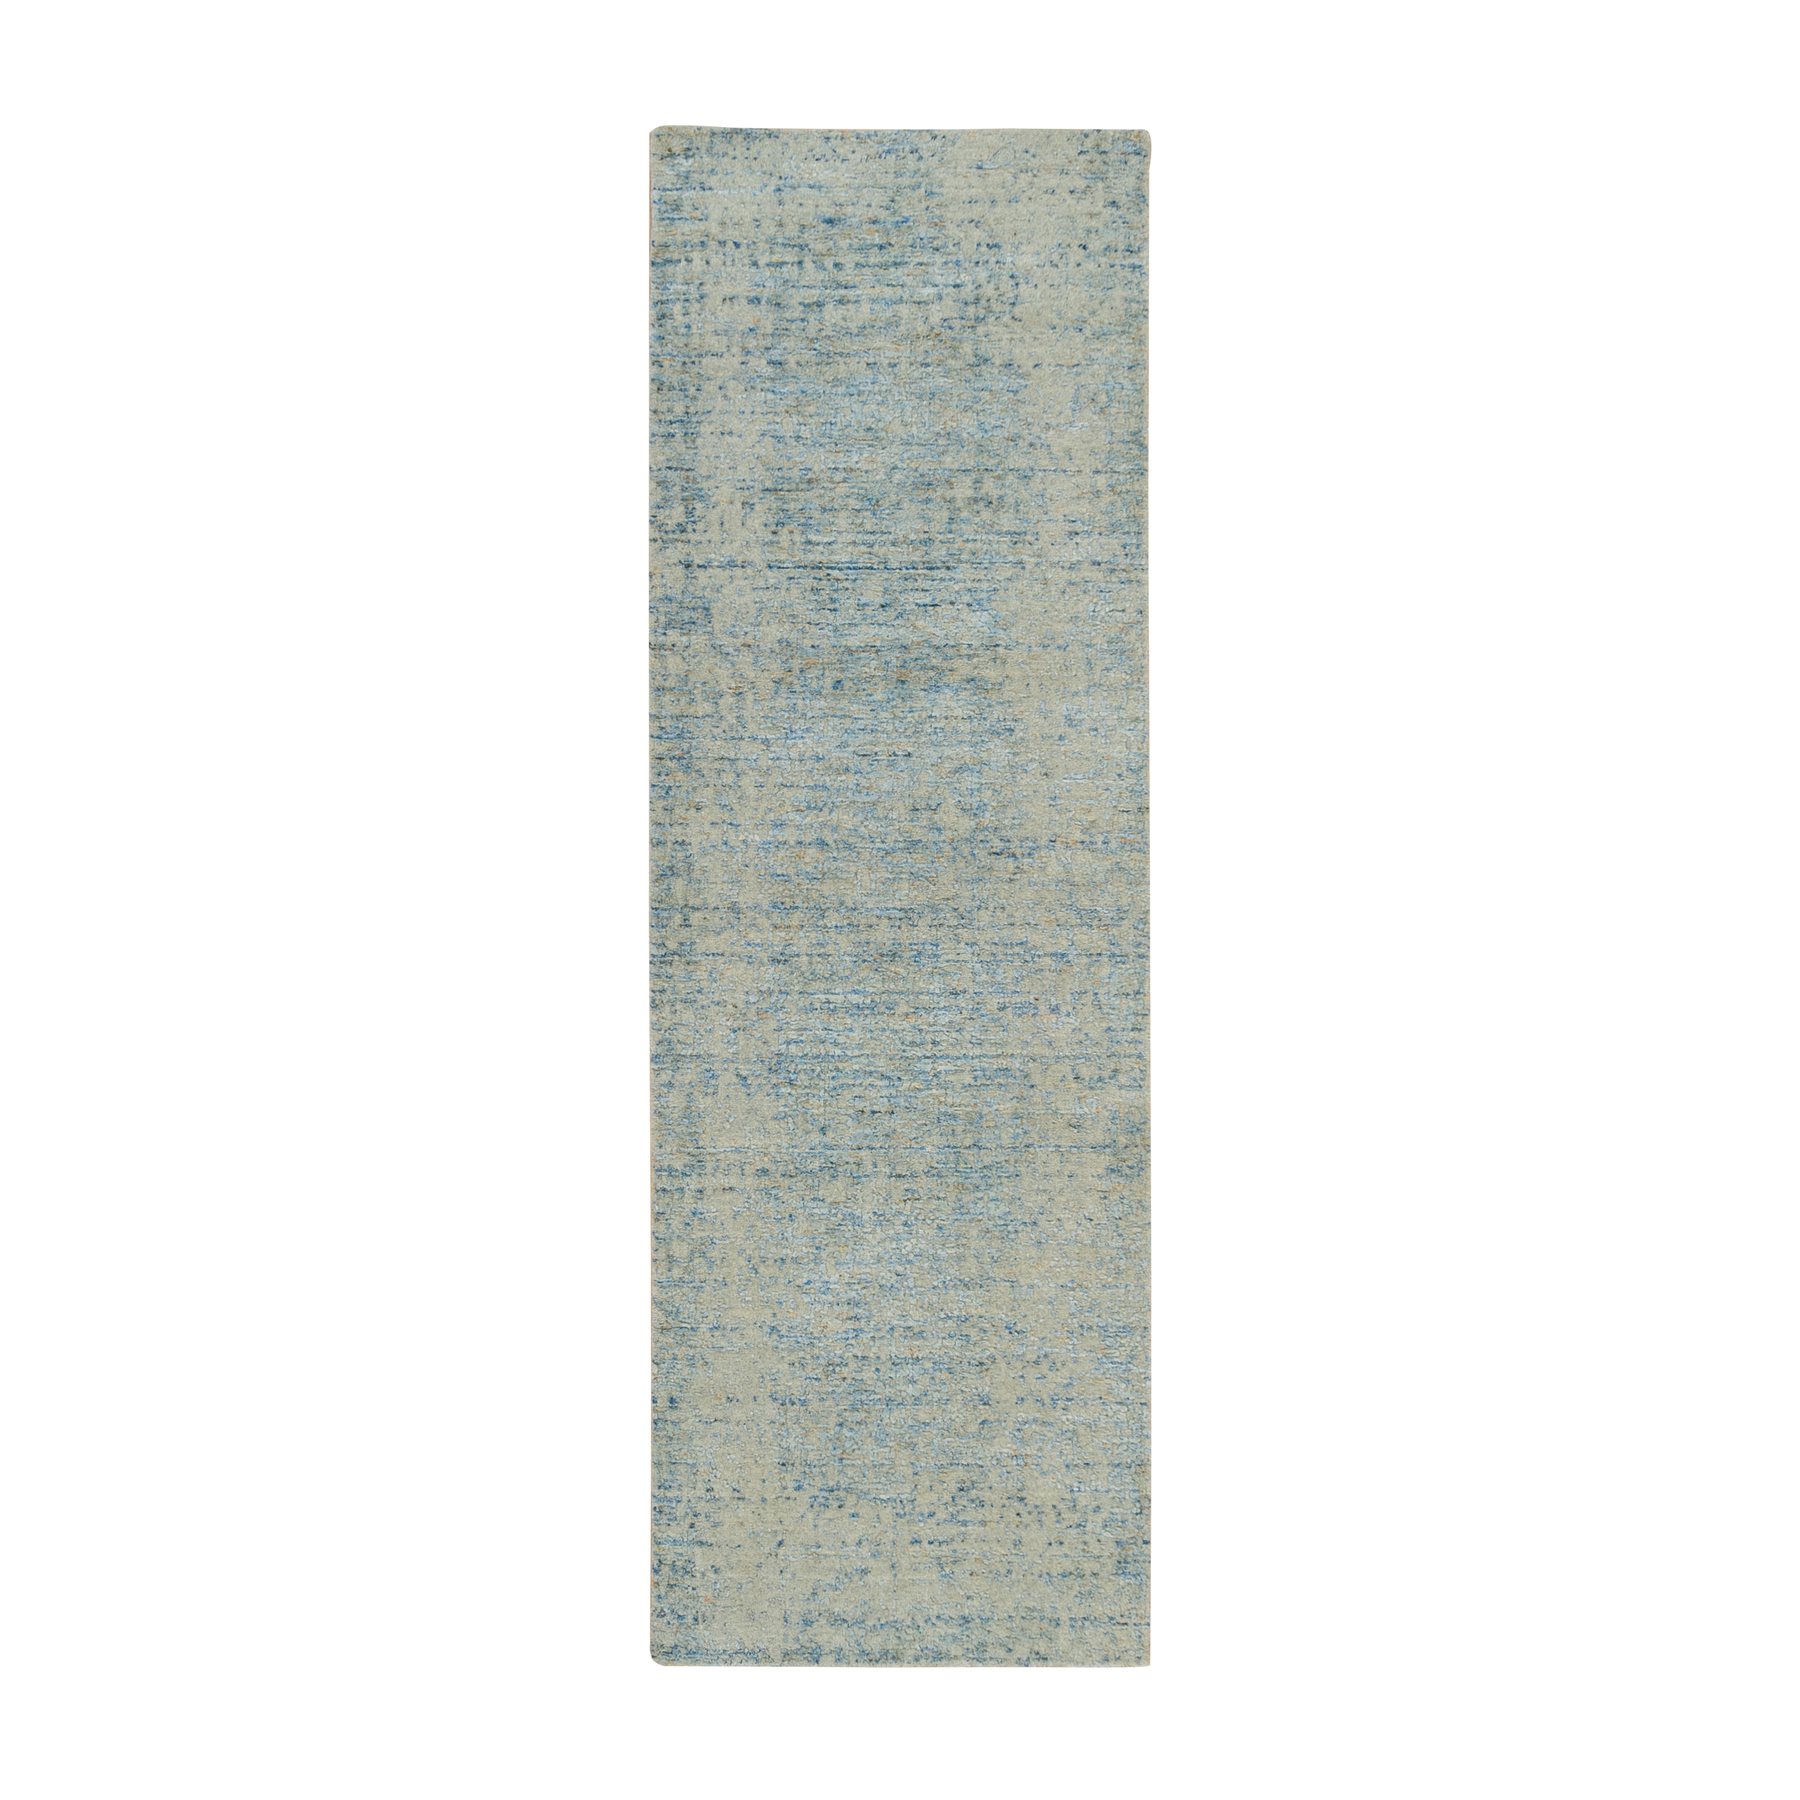 Gray with Touches of Blue, Wool and Plant Based Silk, Modern Jacquard Hand Loomed, Soft to the Touch, Runner Oriental Rug 